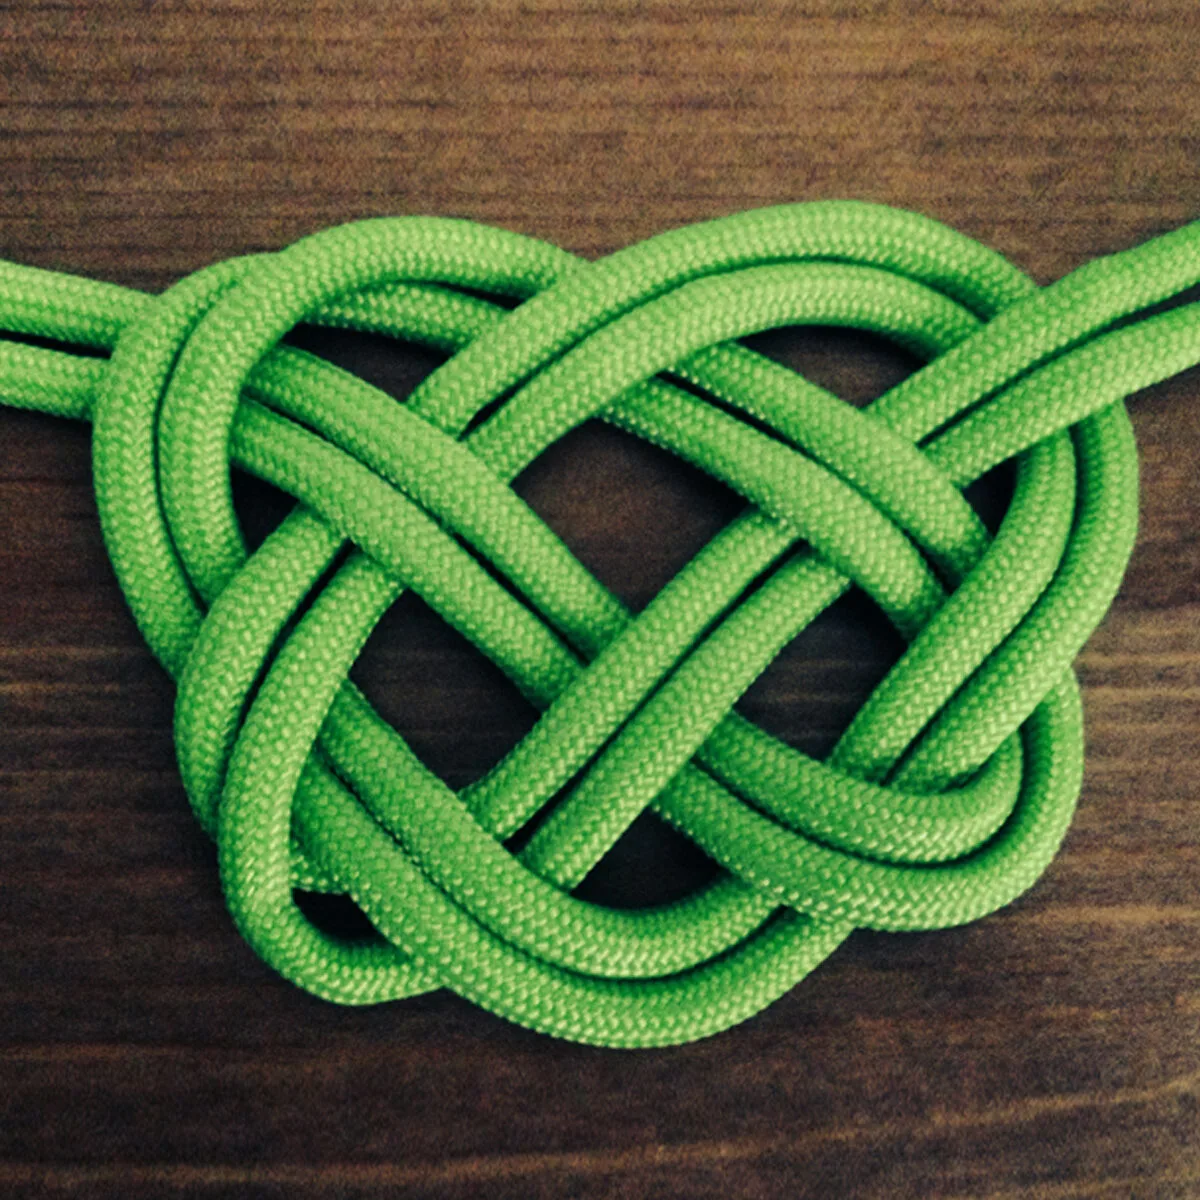 Celtic Heart Knot with double strands of green colored rope atop wooden background.